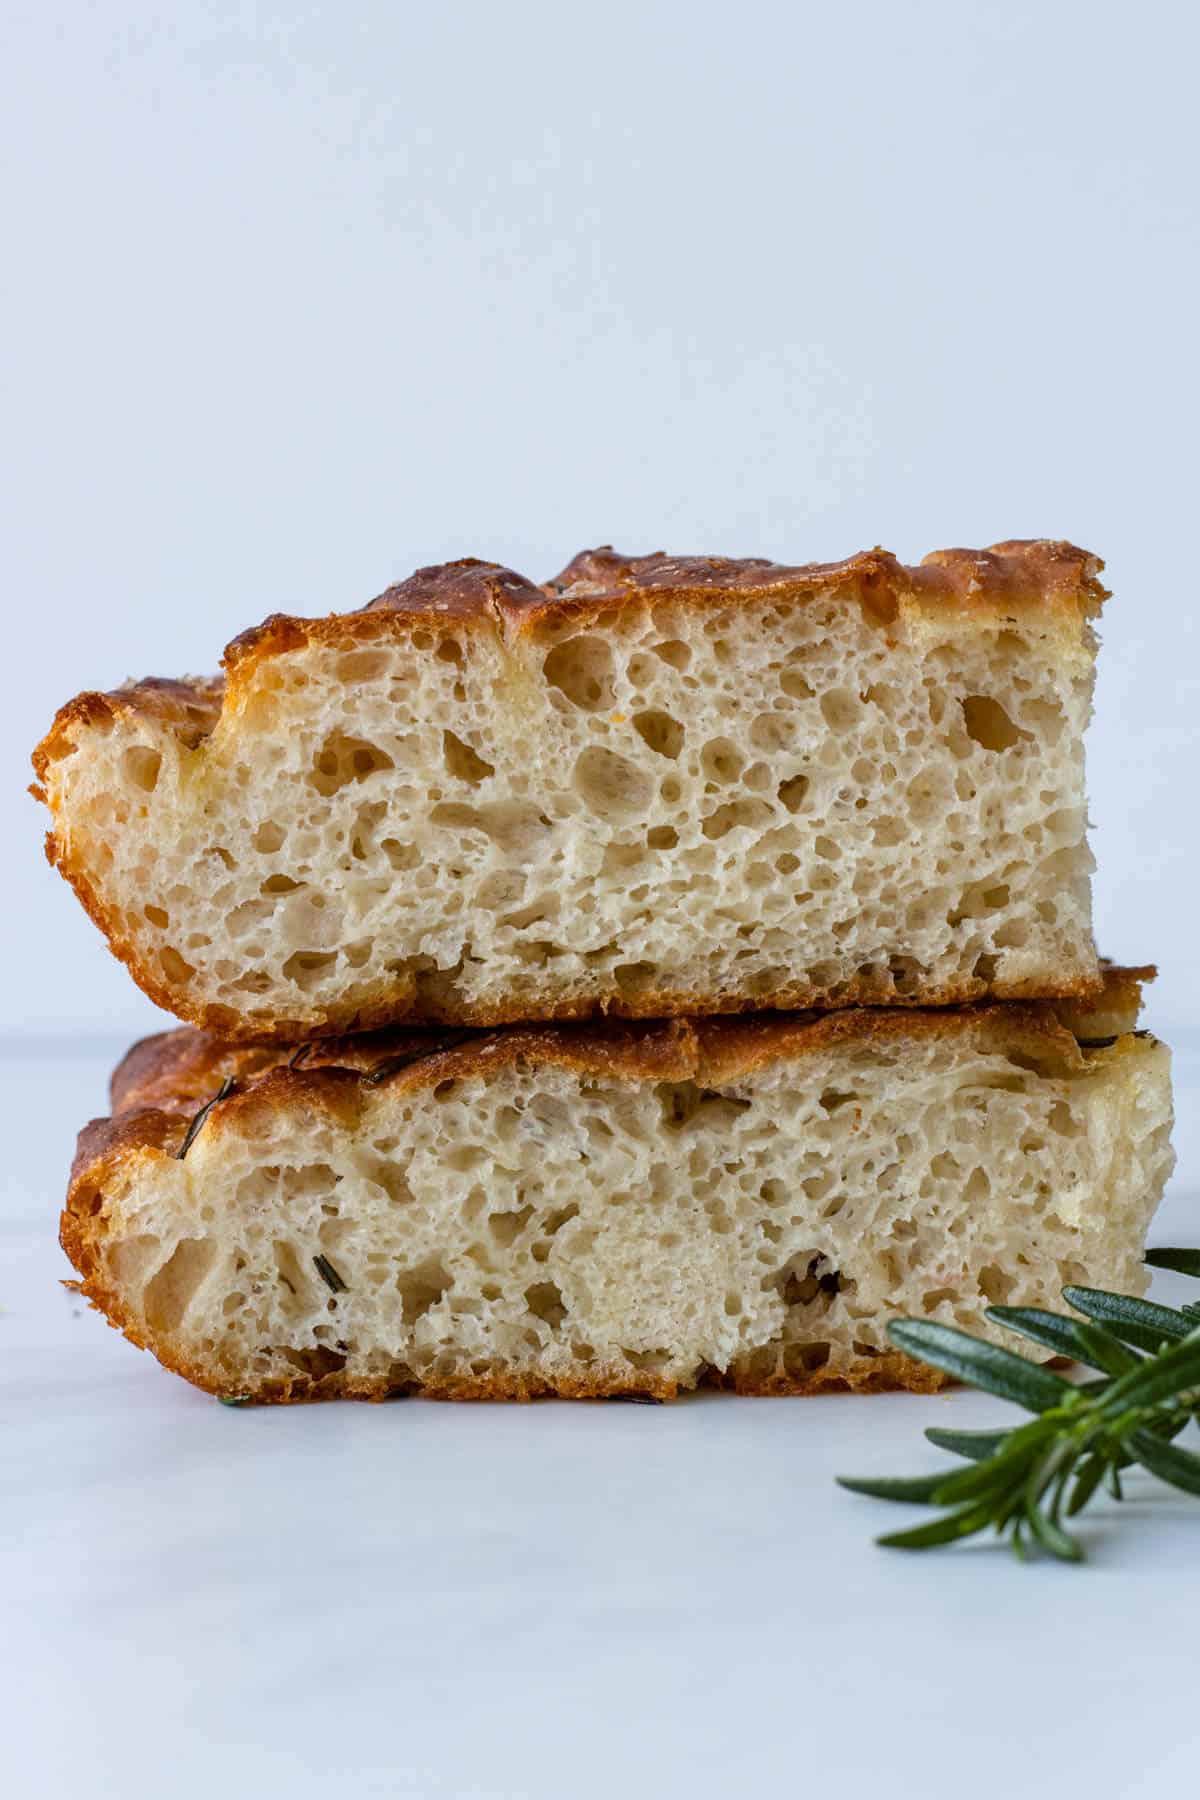 https://cookingwithayeh.com/wp-content/uploads/2021/07/No-Knead-Focaccia-8.jpg